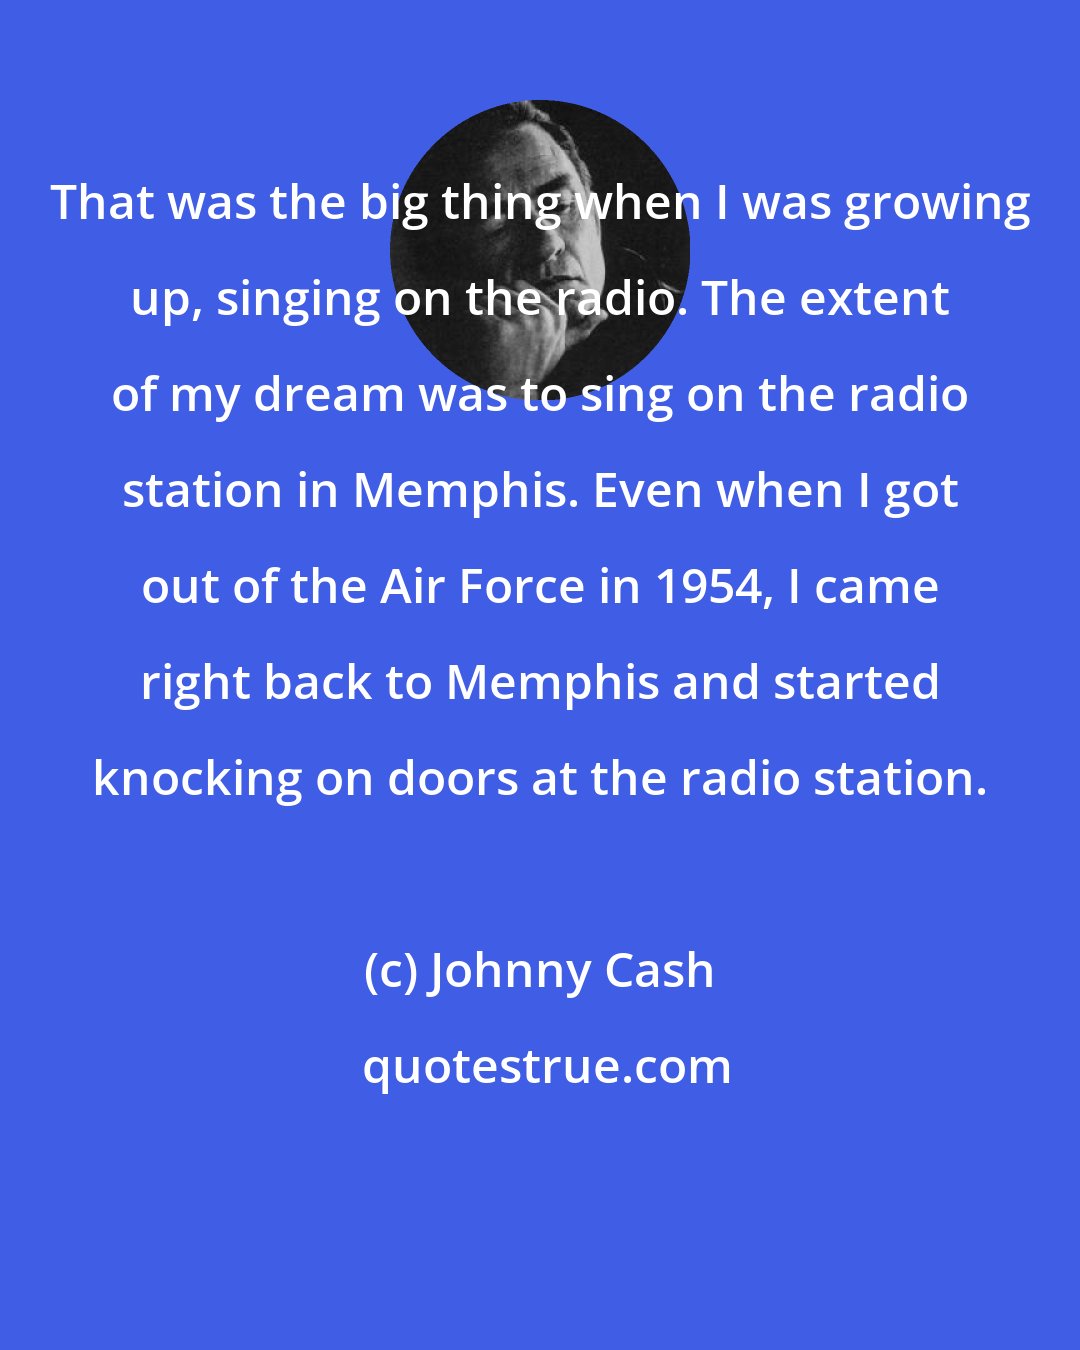 Johnny Cash: That was the big thing when I was growing up, singing on the radio. The extent of my dream was to sing on the radio station in Memphis. Even when I got out of the Air Force in 1954, I came right back to Memphis and started knocking on doors at the radio station.